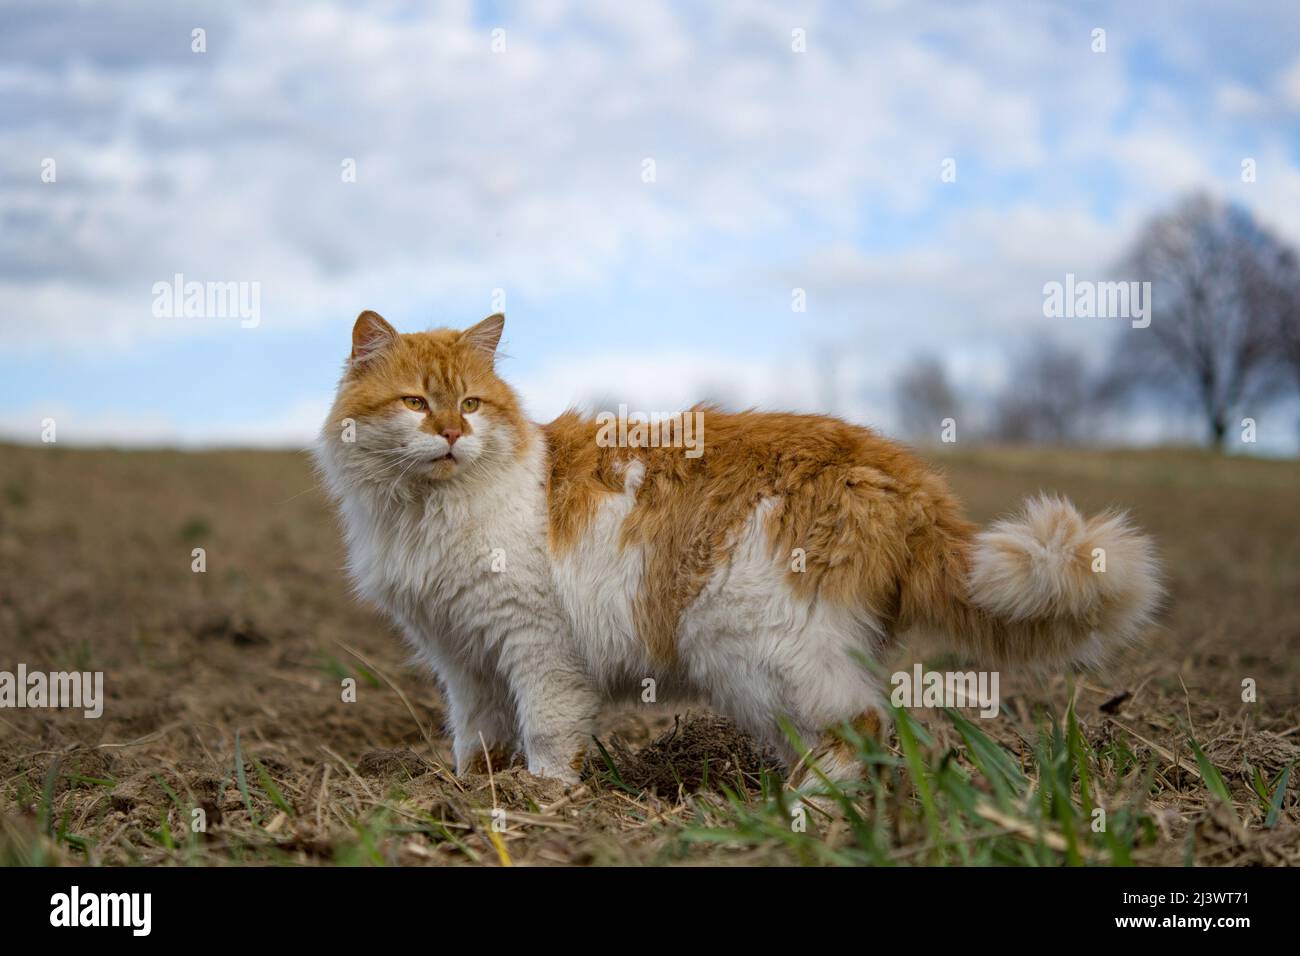 Cat on nature outdoors. Cat walking Stock Photo